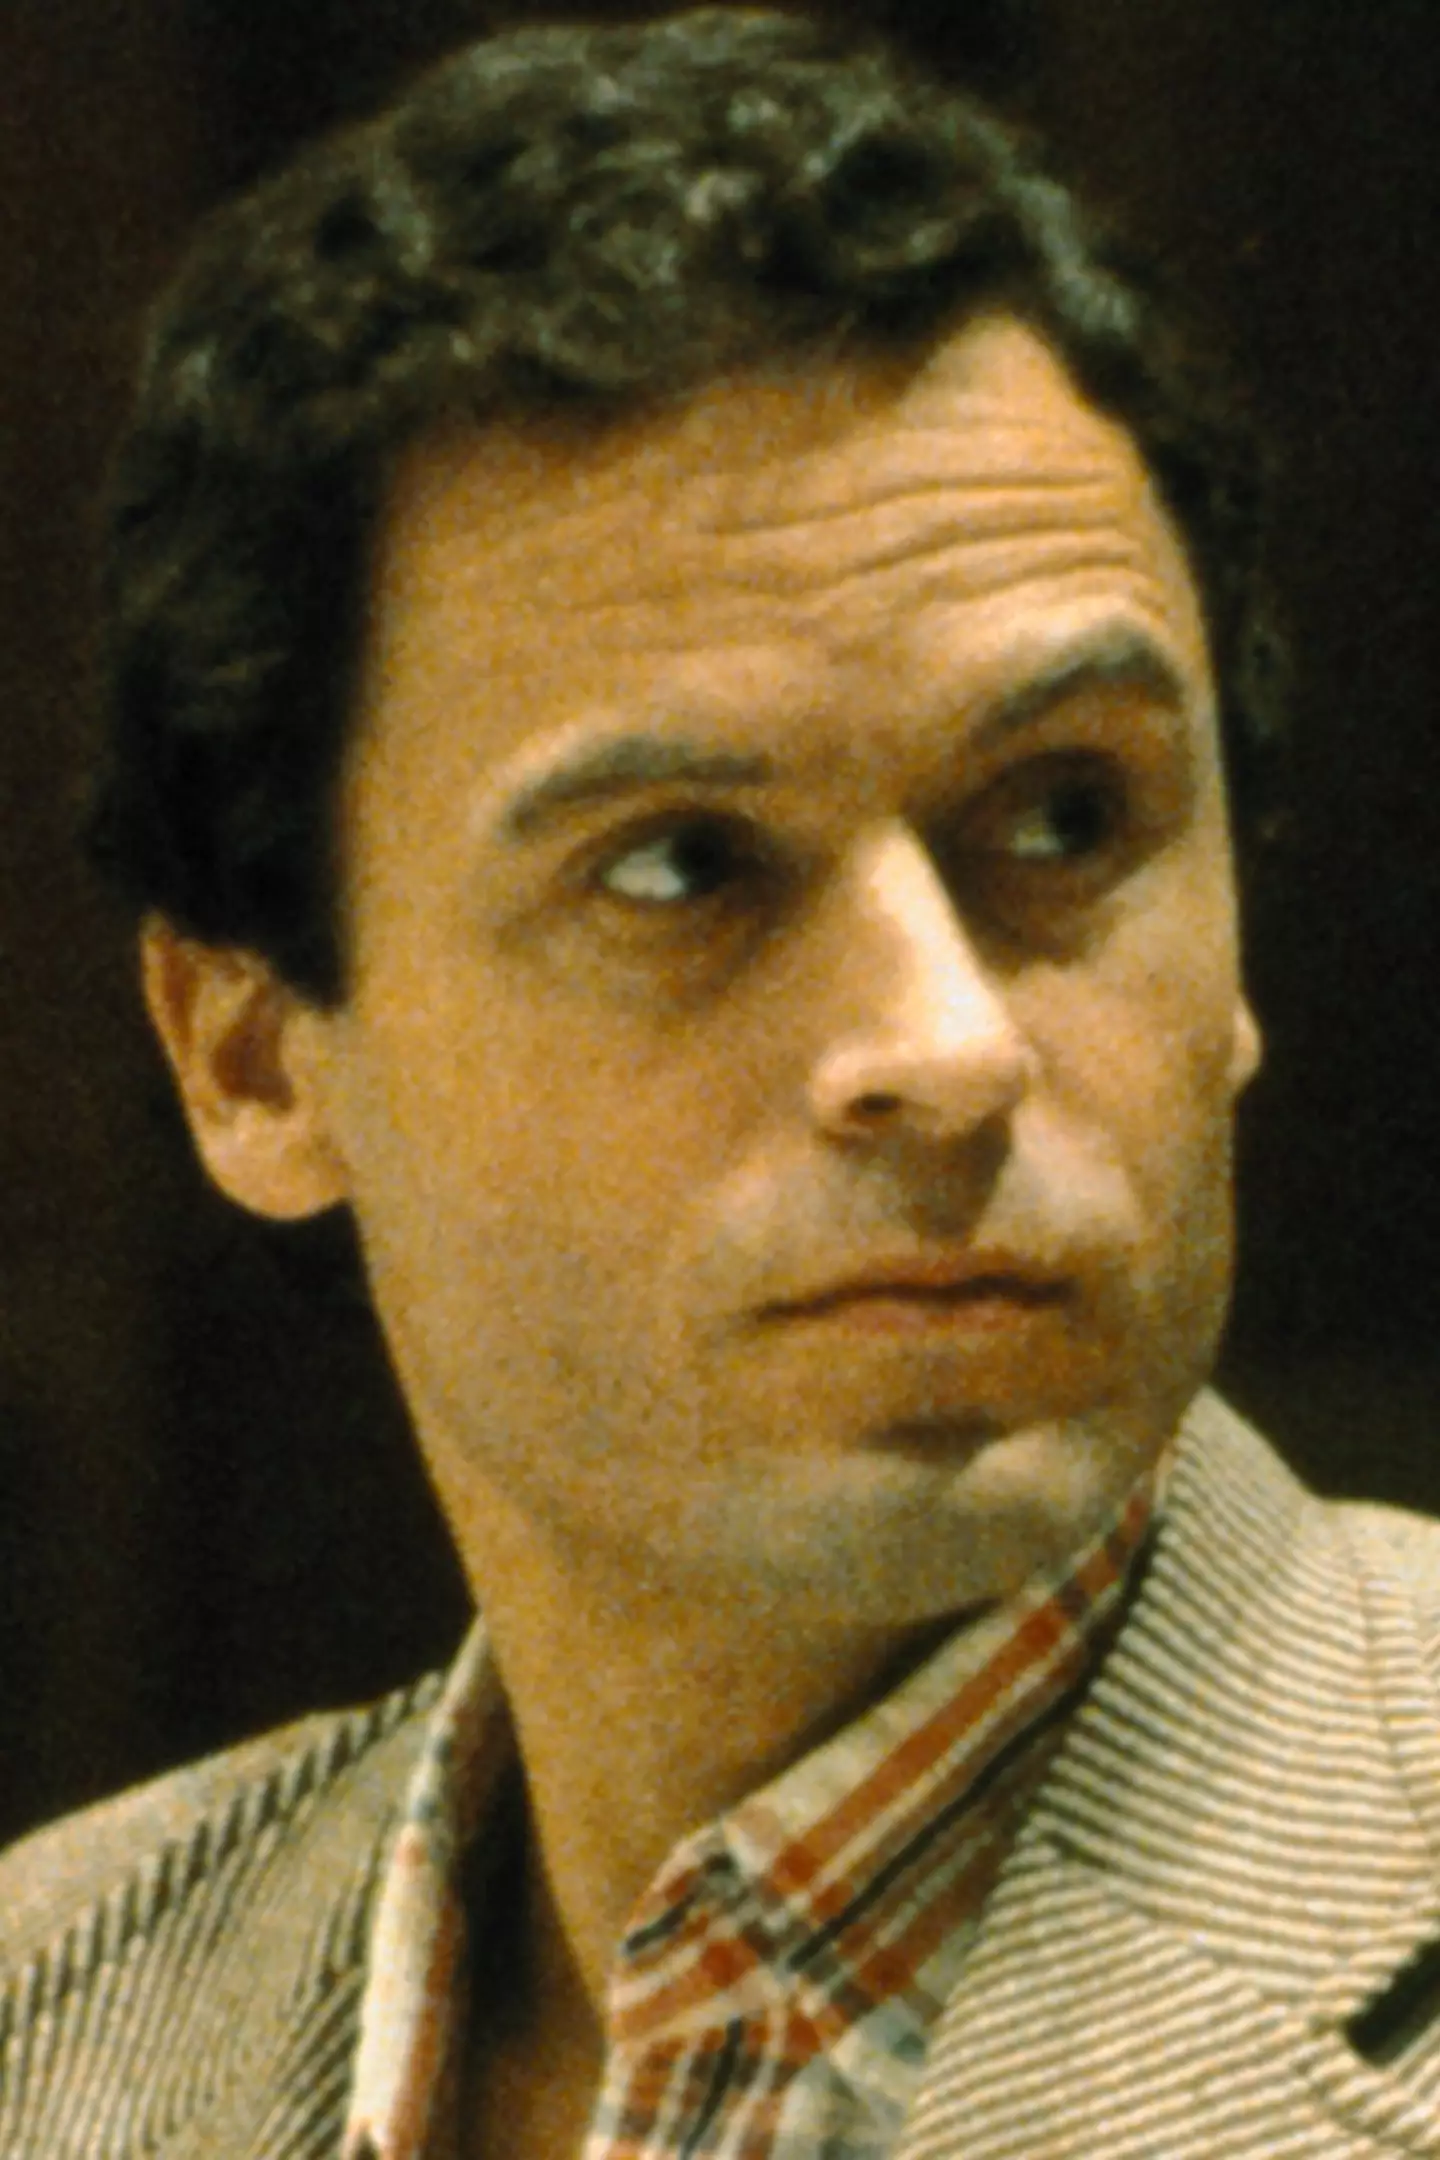 Ted Bundy's cousin claimed she was initially adamant he was innocent. (Bettmann via Getty)